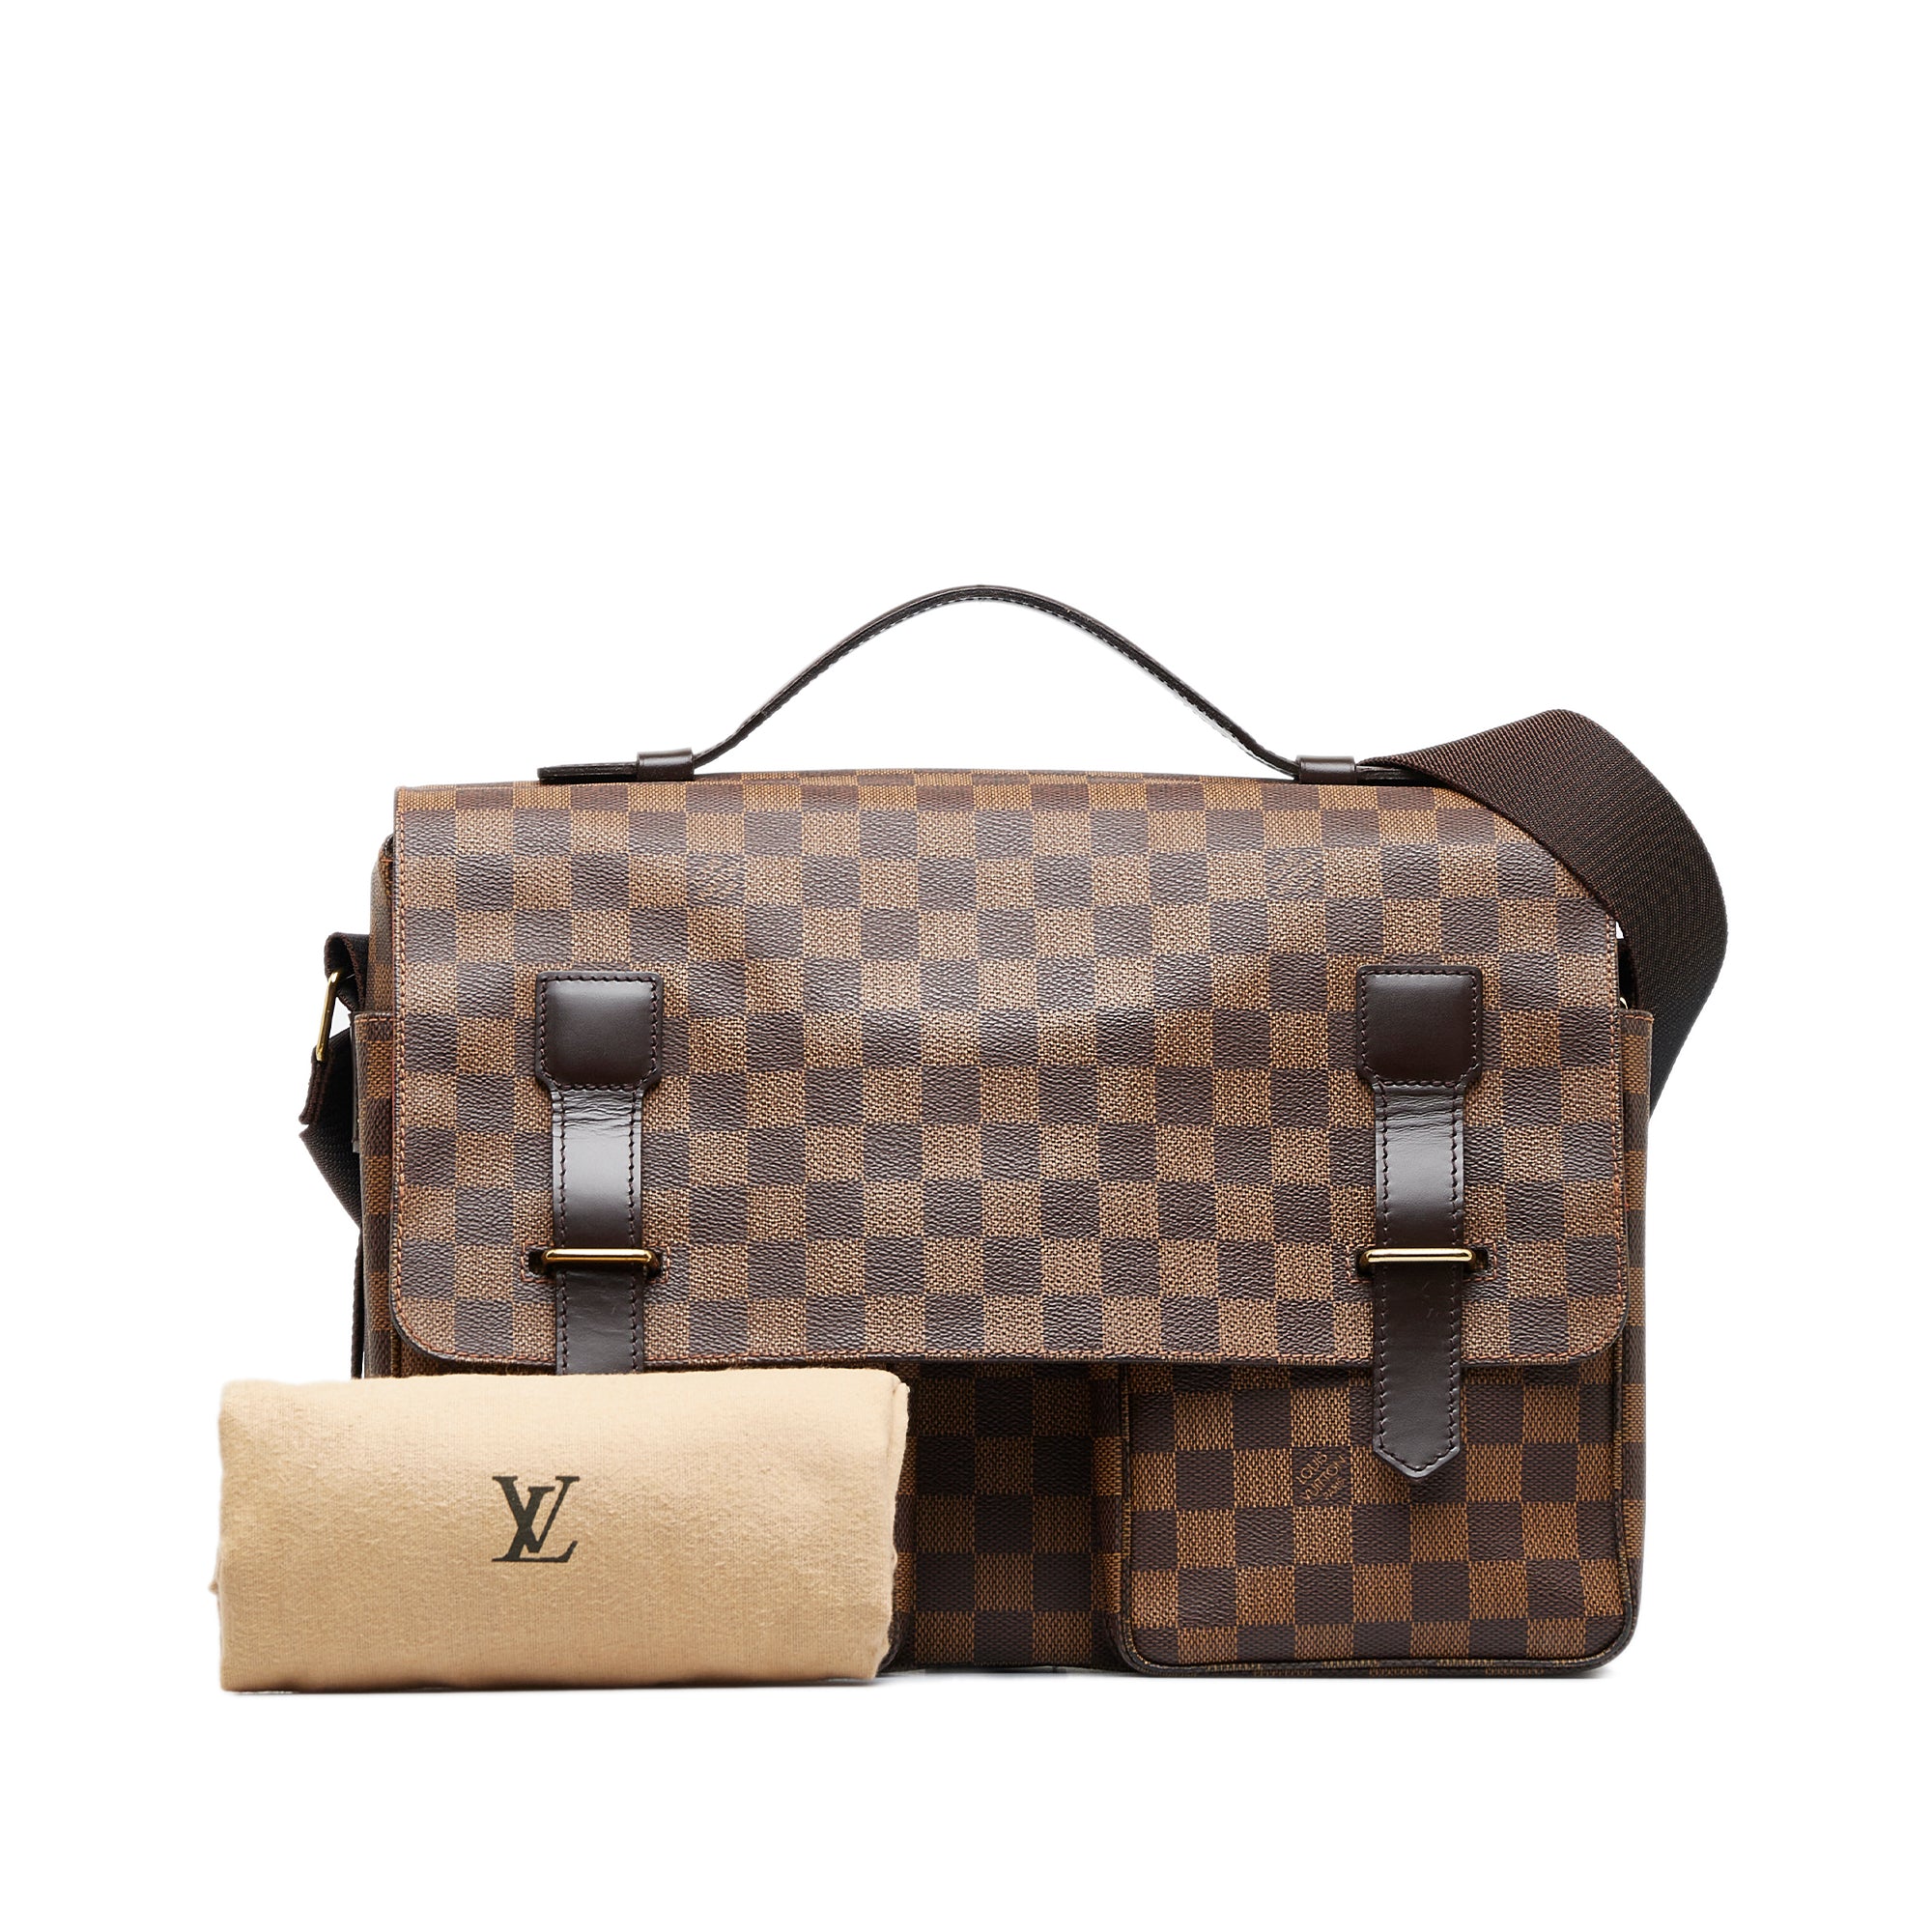 I intend to buy one of these over the weekend. I have been so confused on  which to go for: Damier or Mono? This is going to be my first LV. Can